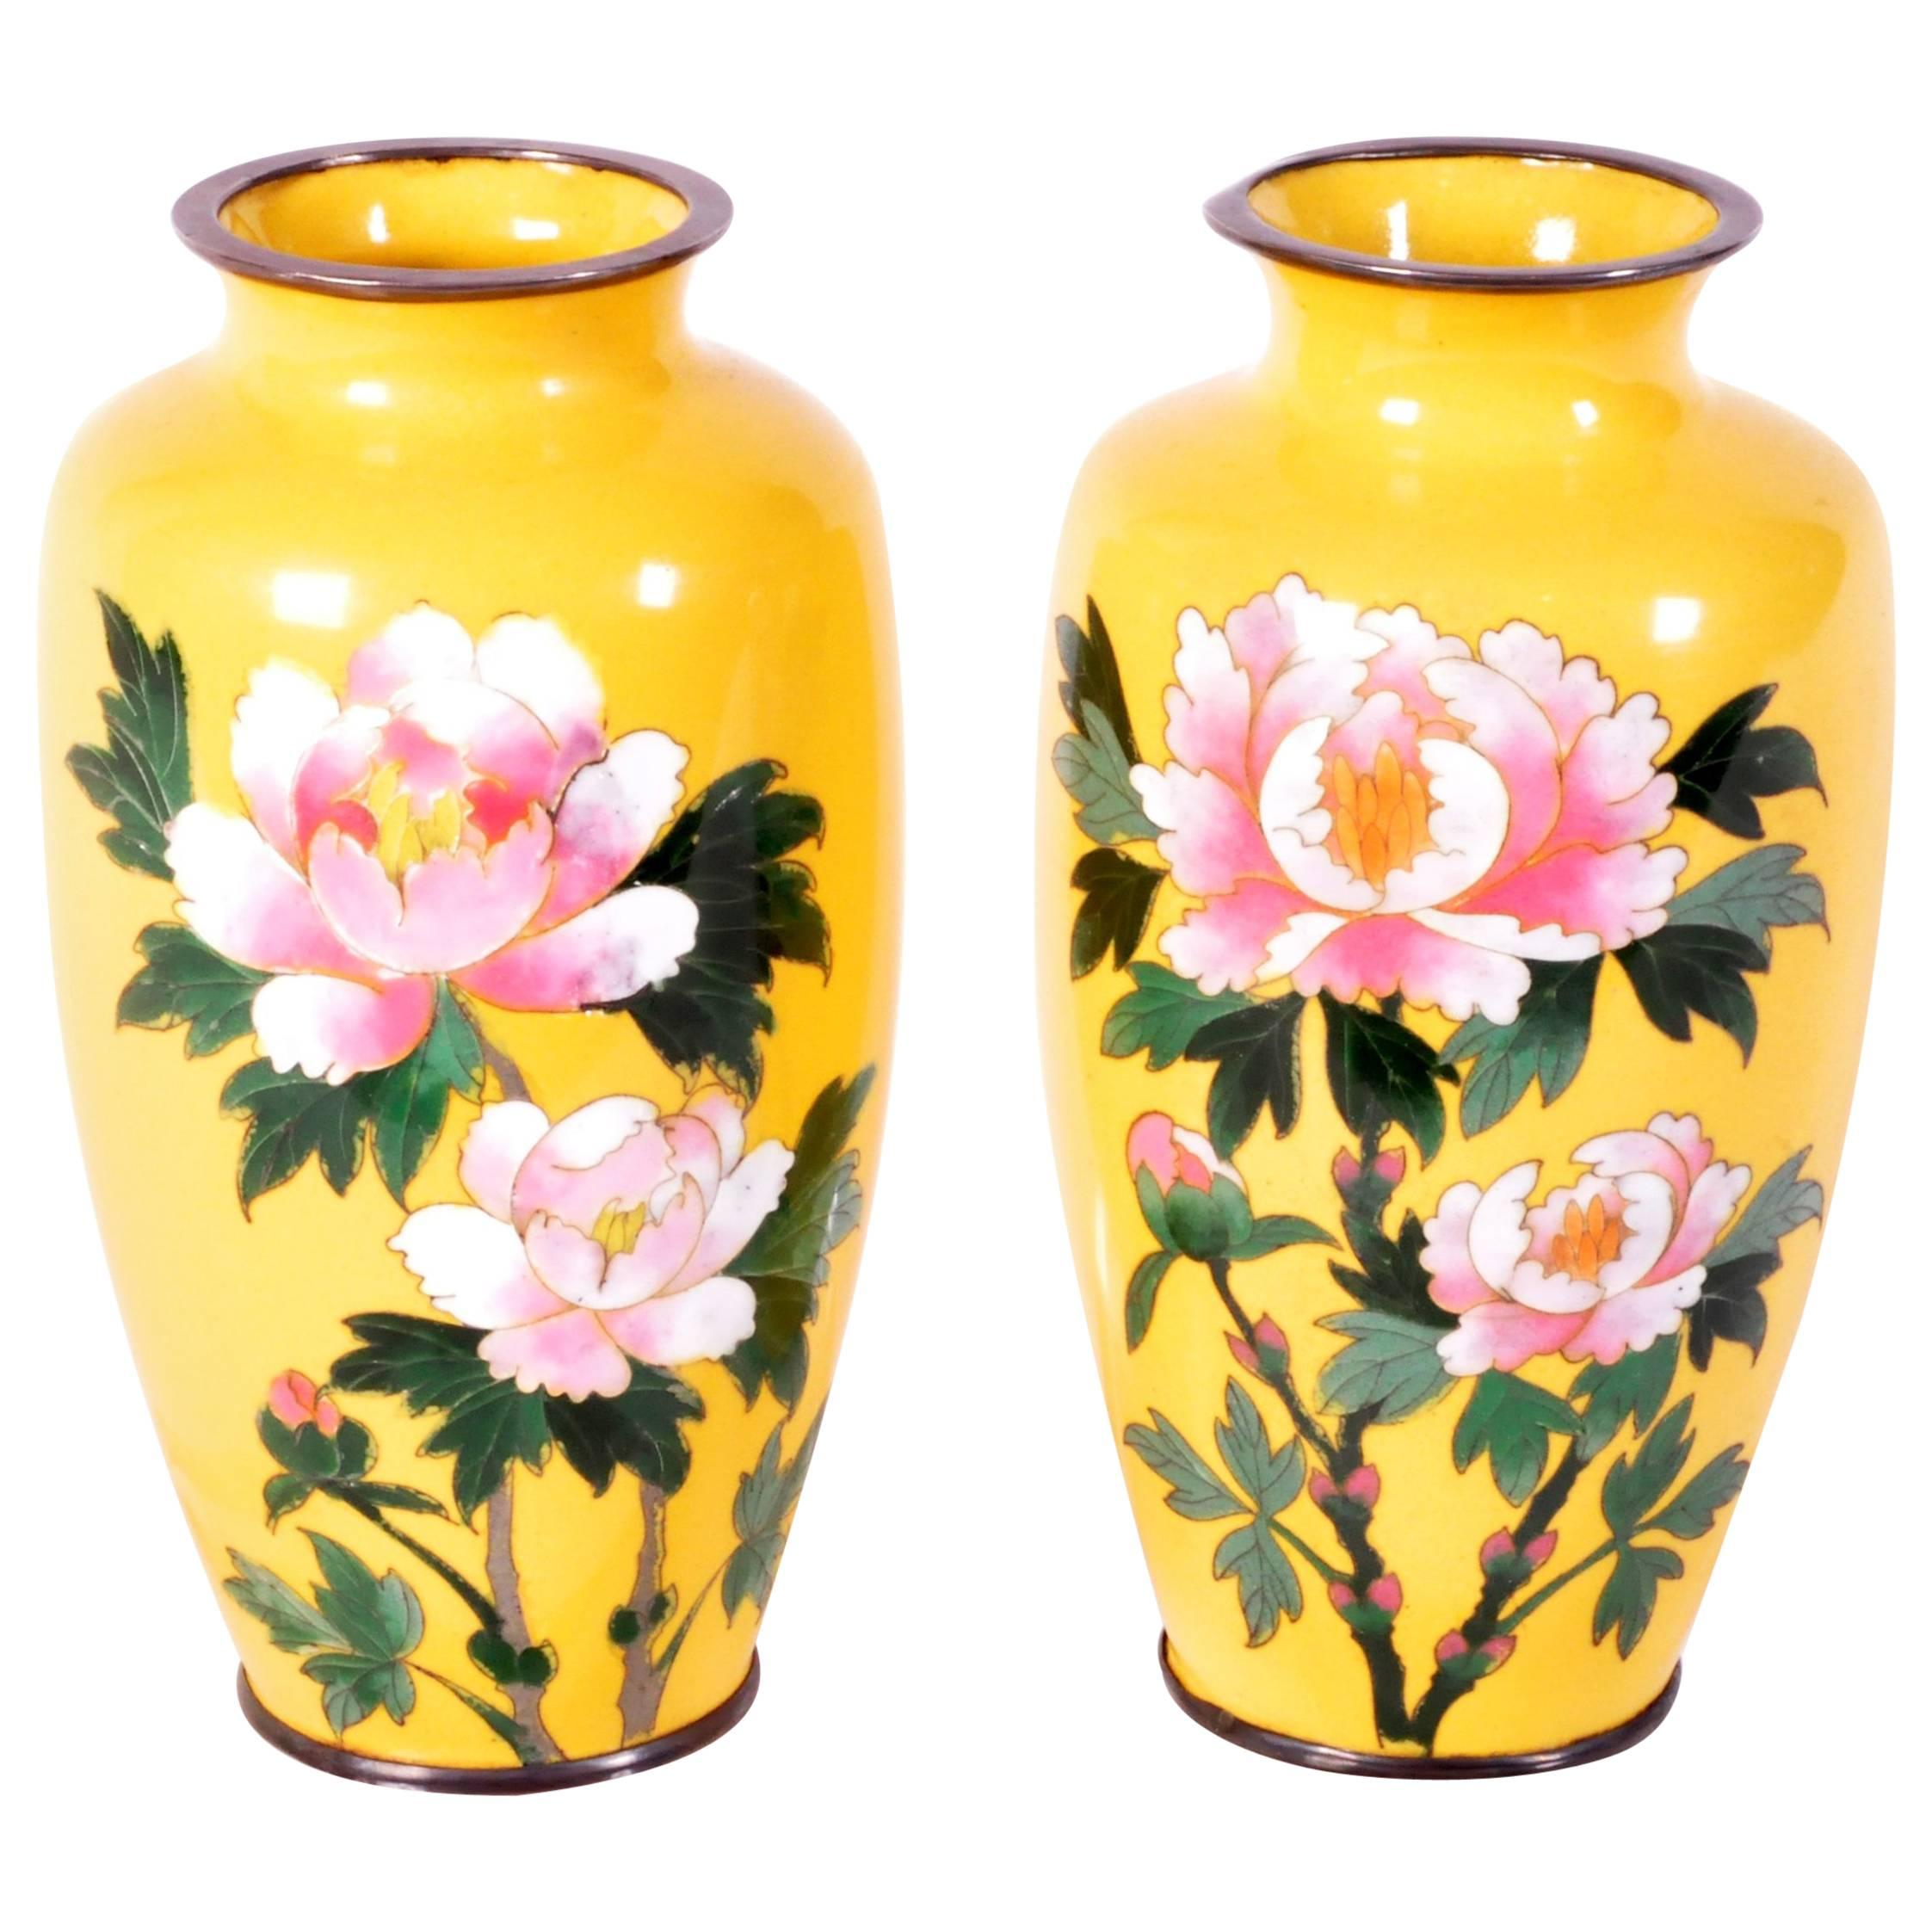 Pair of Japanese Cloisonné Vases with Peony Motif